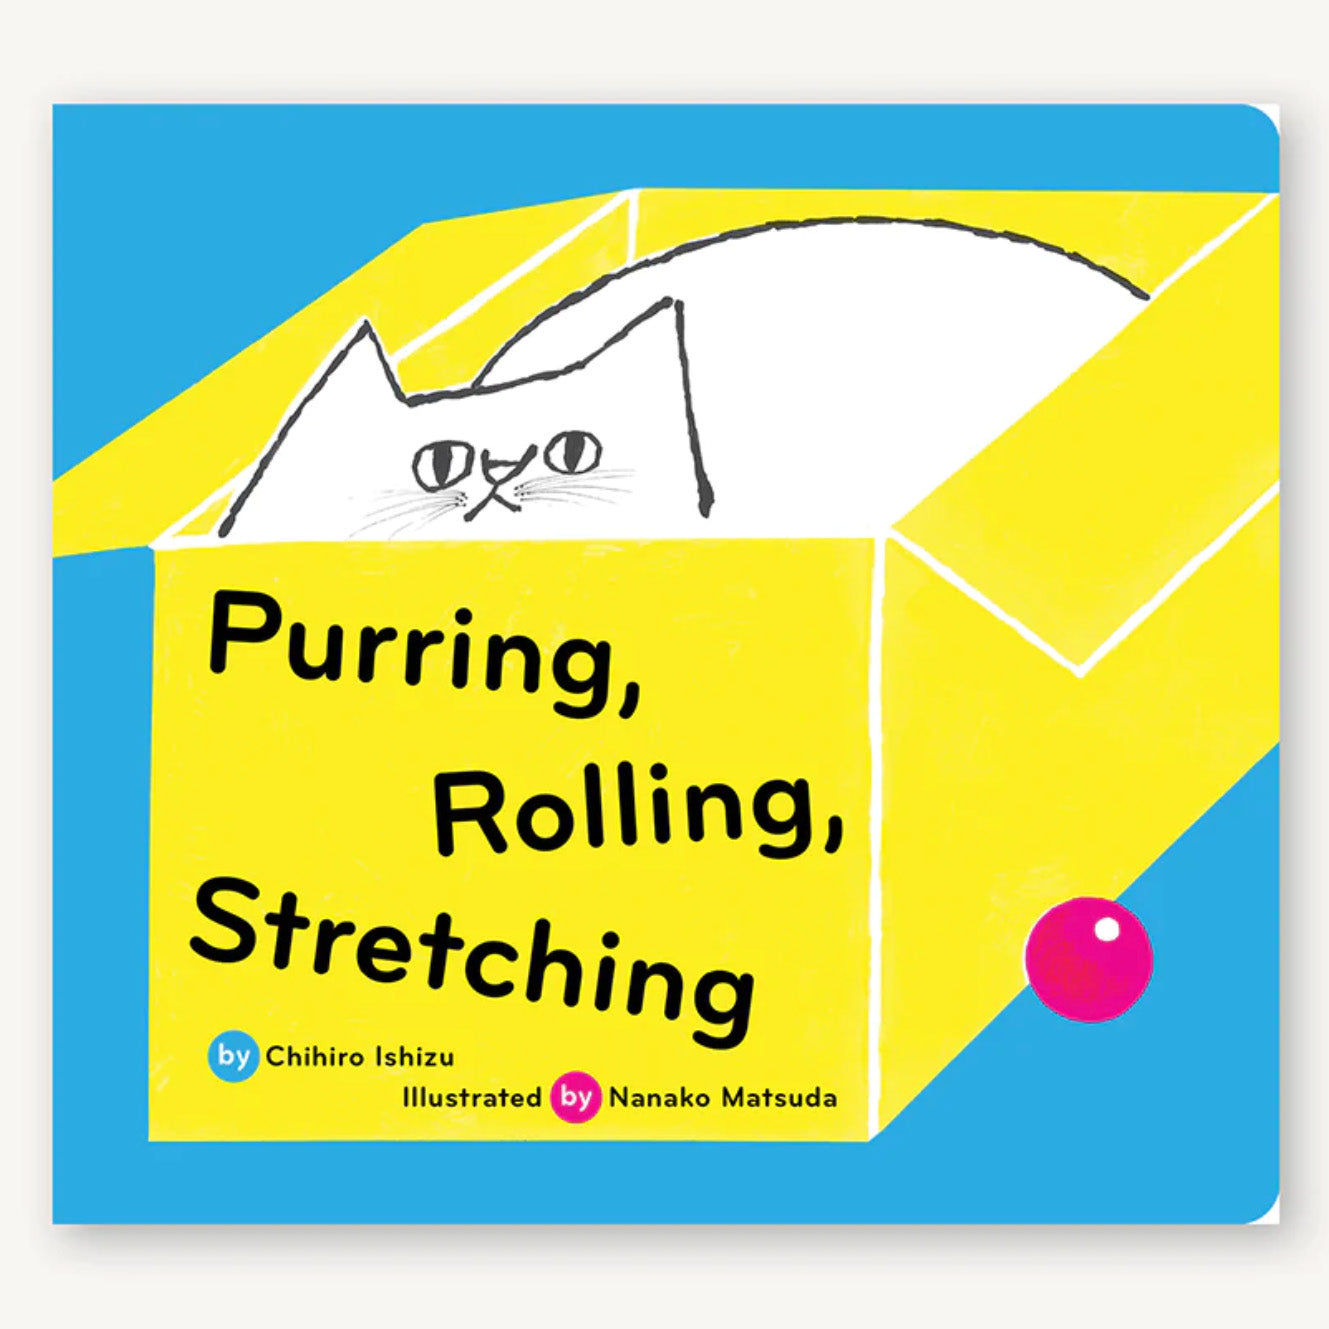 purring, rolling, stretching